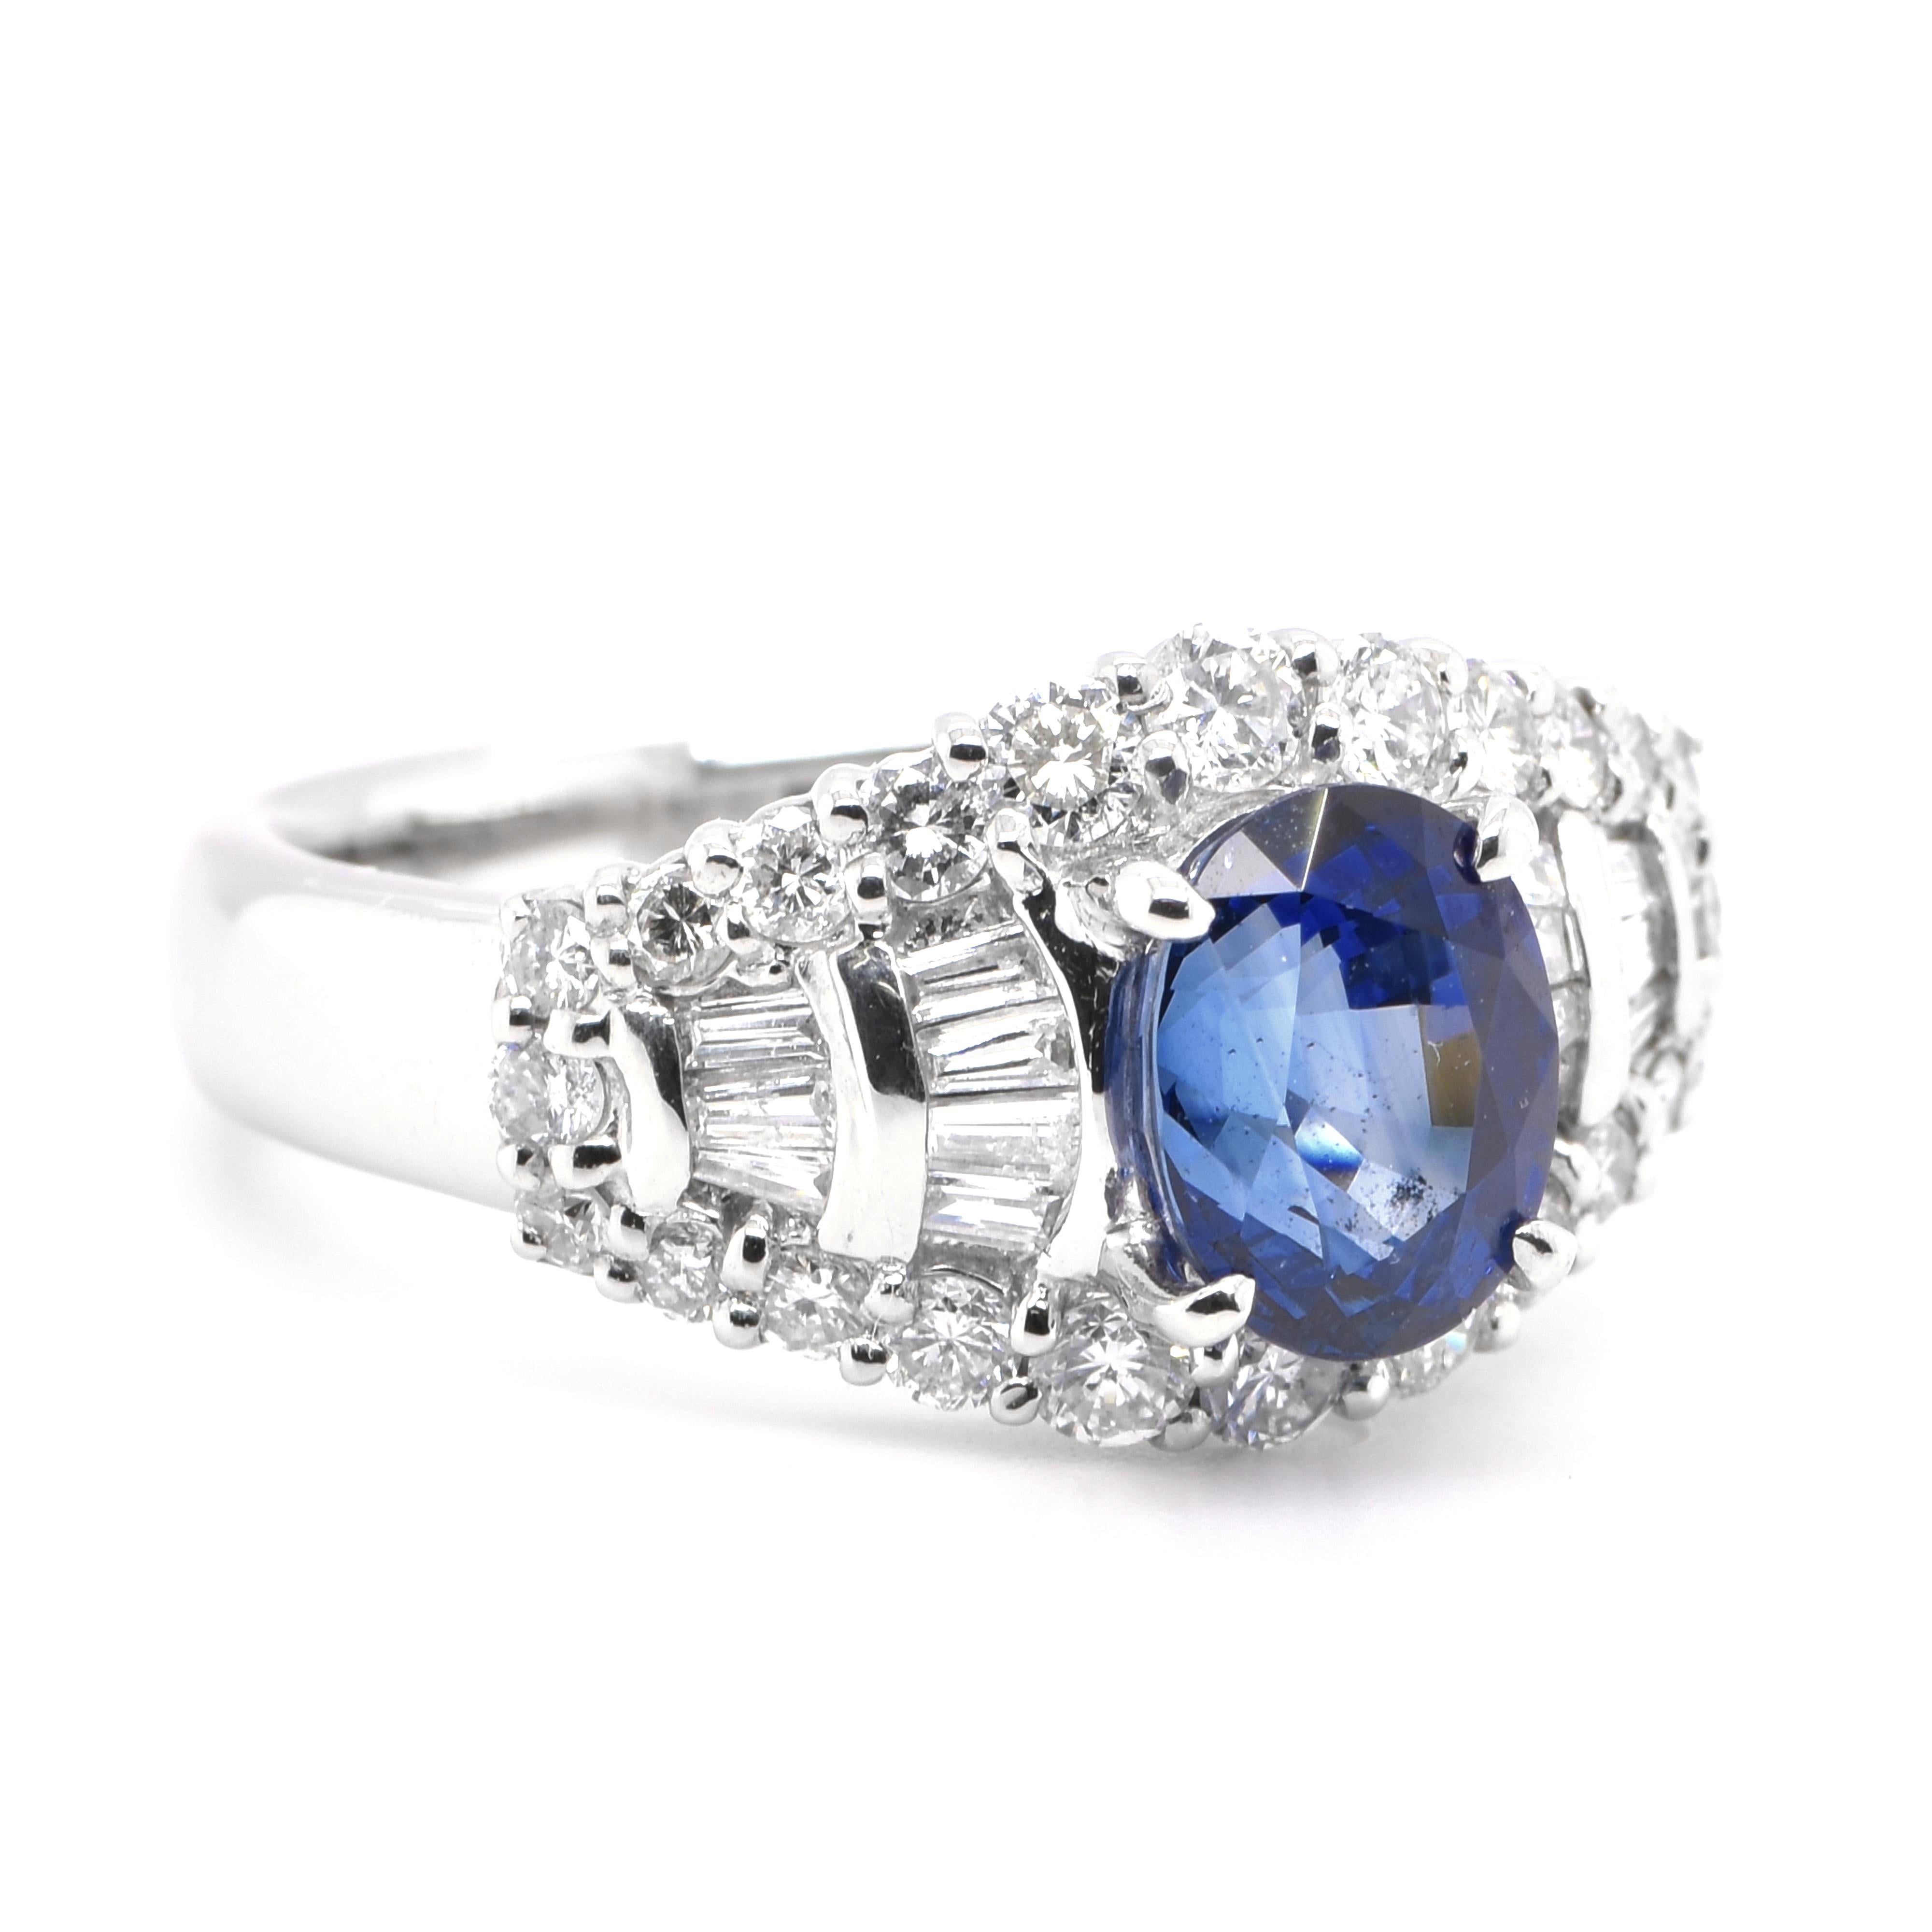 Oval Cut 2.02 Carat Natural Sapphire and Diamond Art Deco Style Ring Set in Platinum